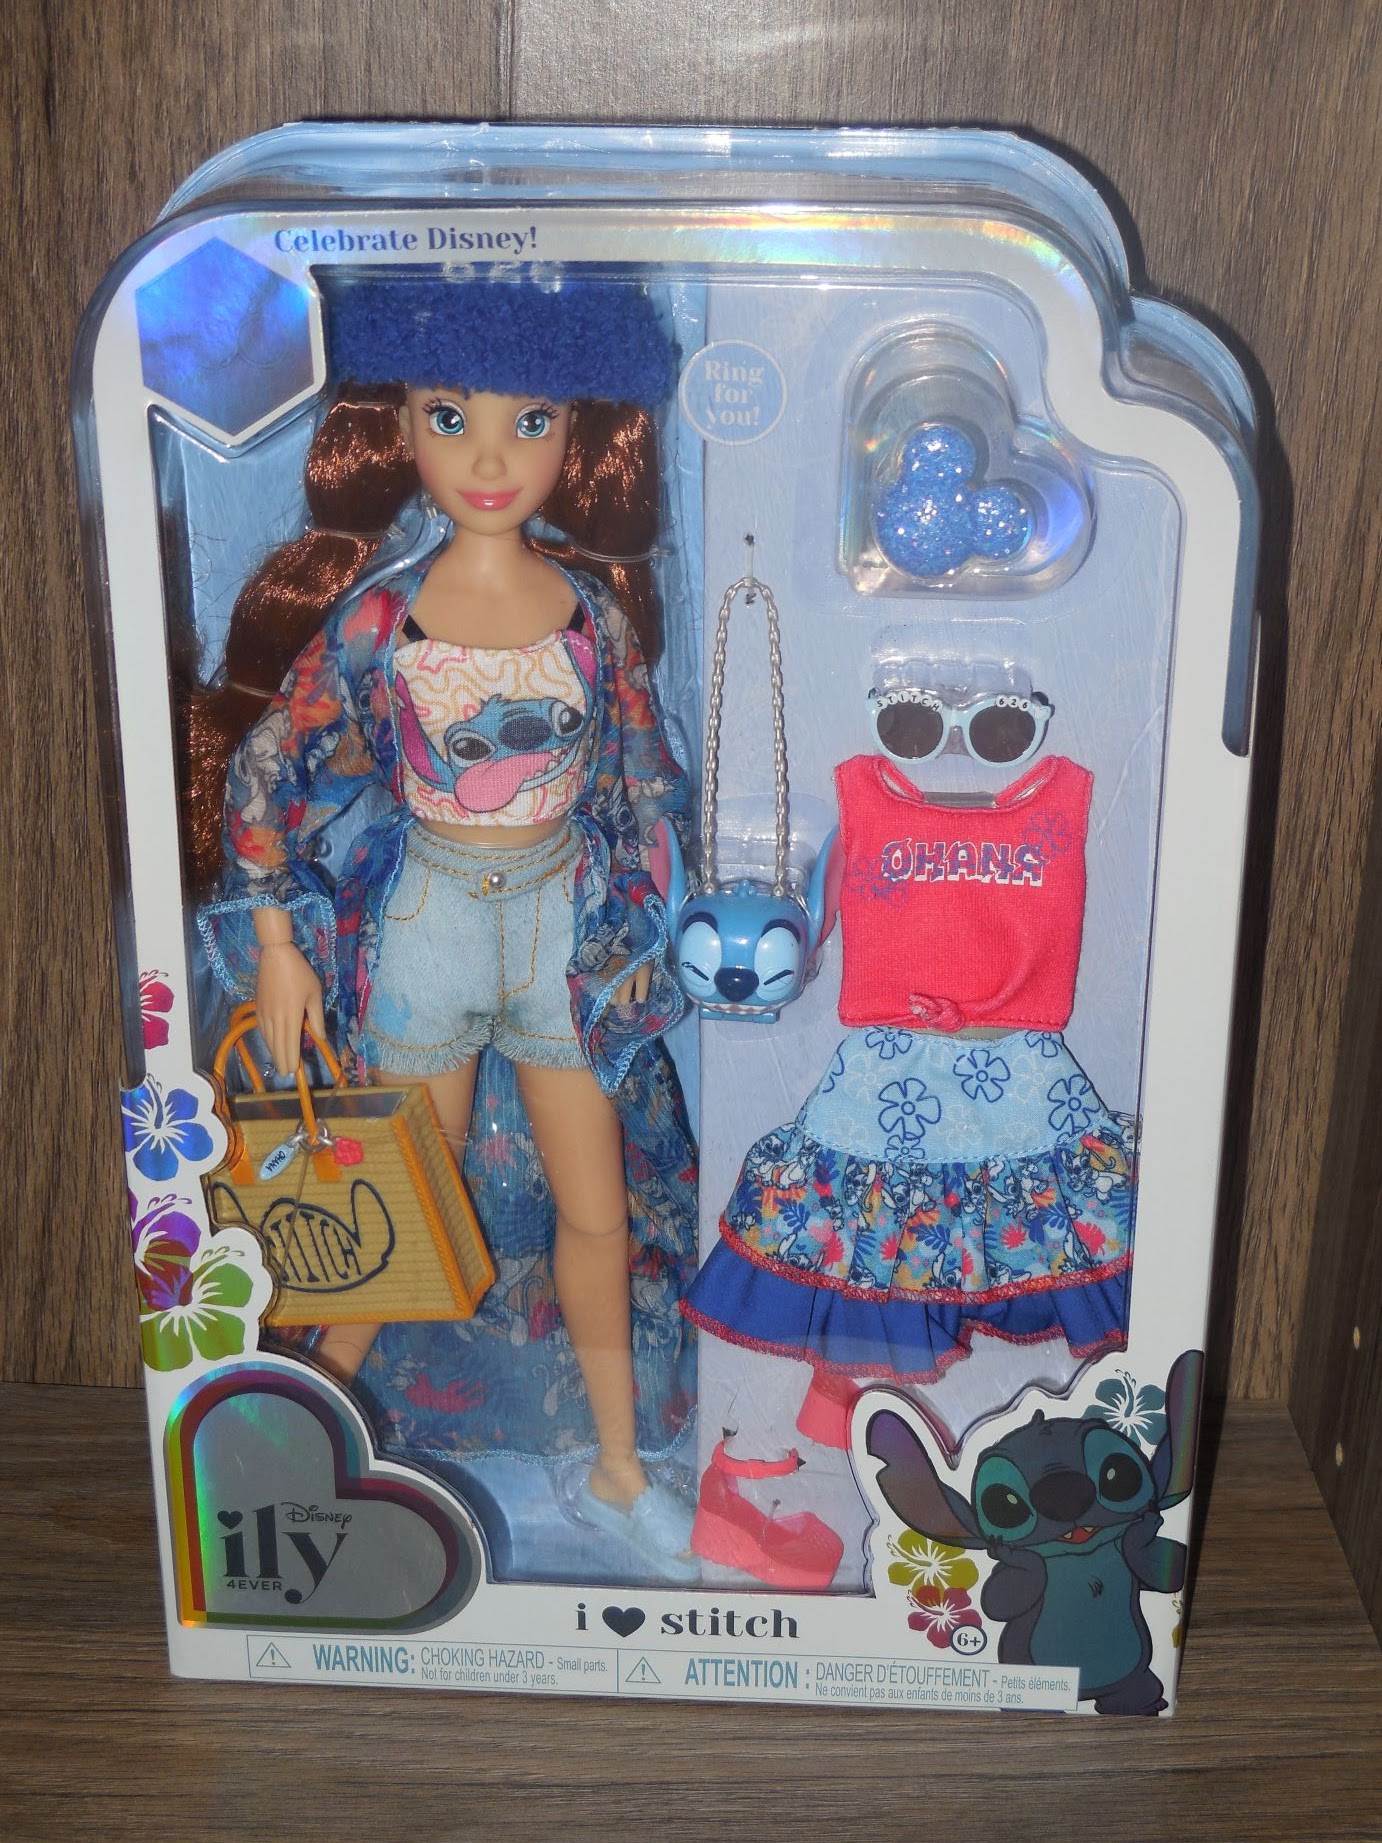 Opening a Disney ILY 4ever doll! Stitch Edition! She is such a